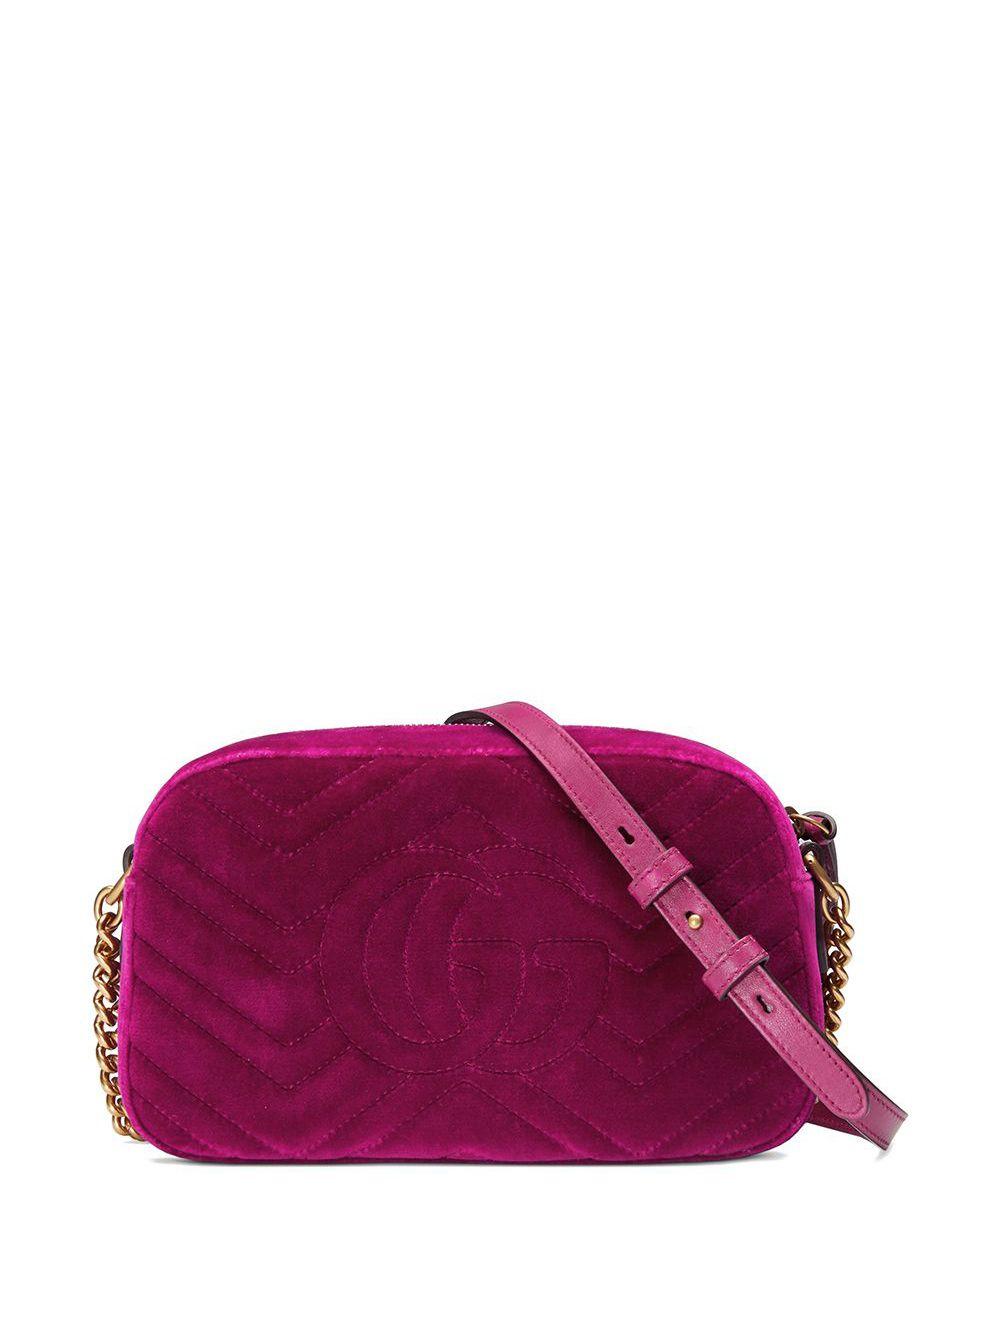 Gucci GG Marmont Velvet Small Shoulder Bag in Pink - Lyst